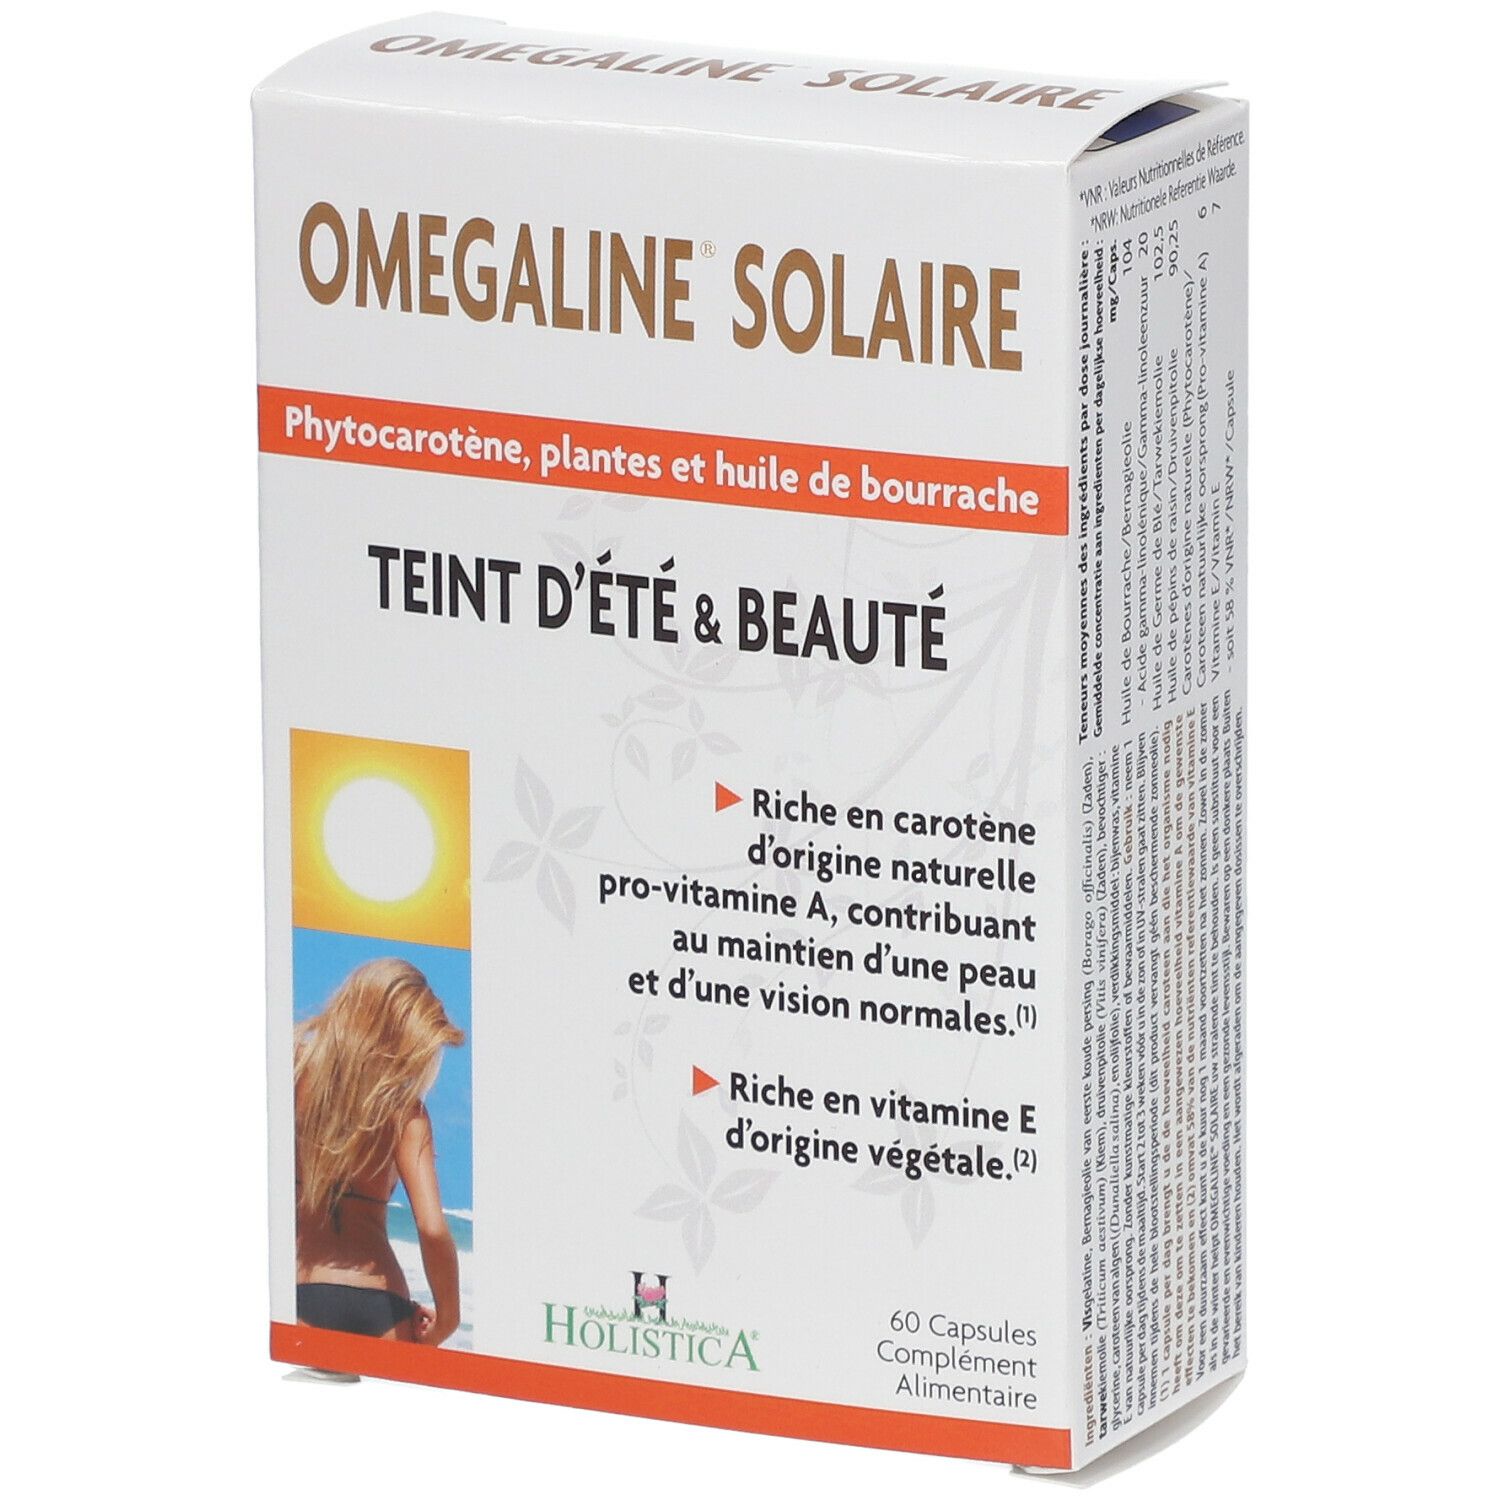 OMEGALINE® SOLAIRE